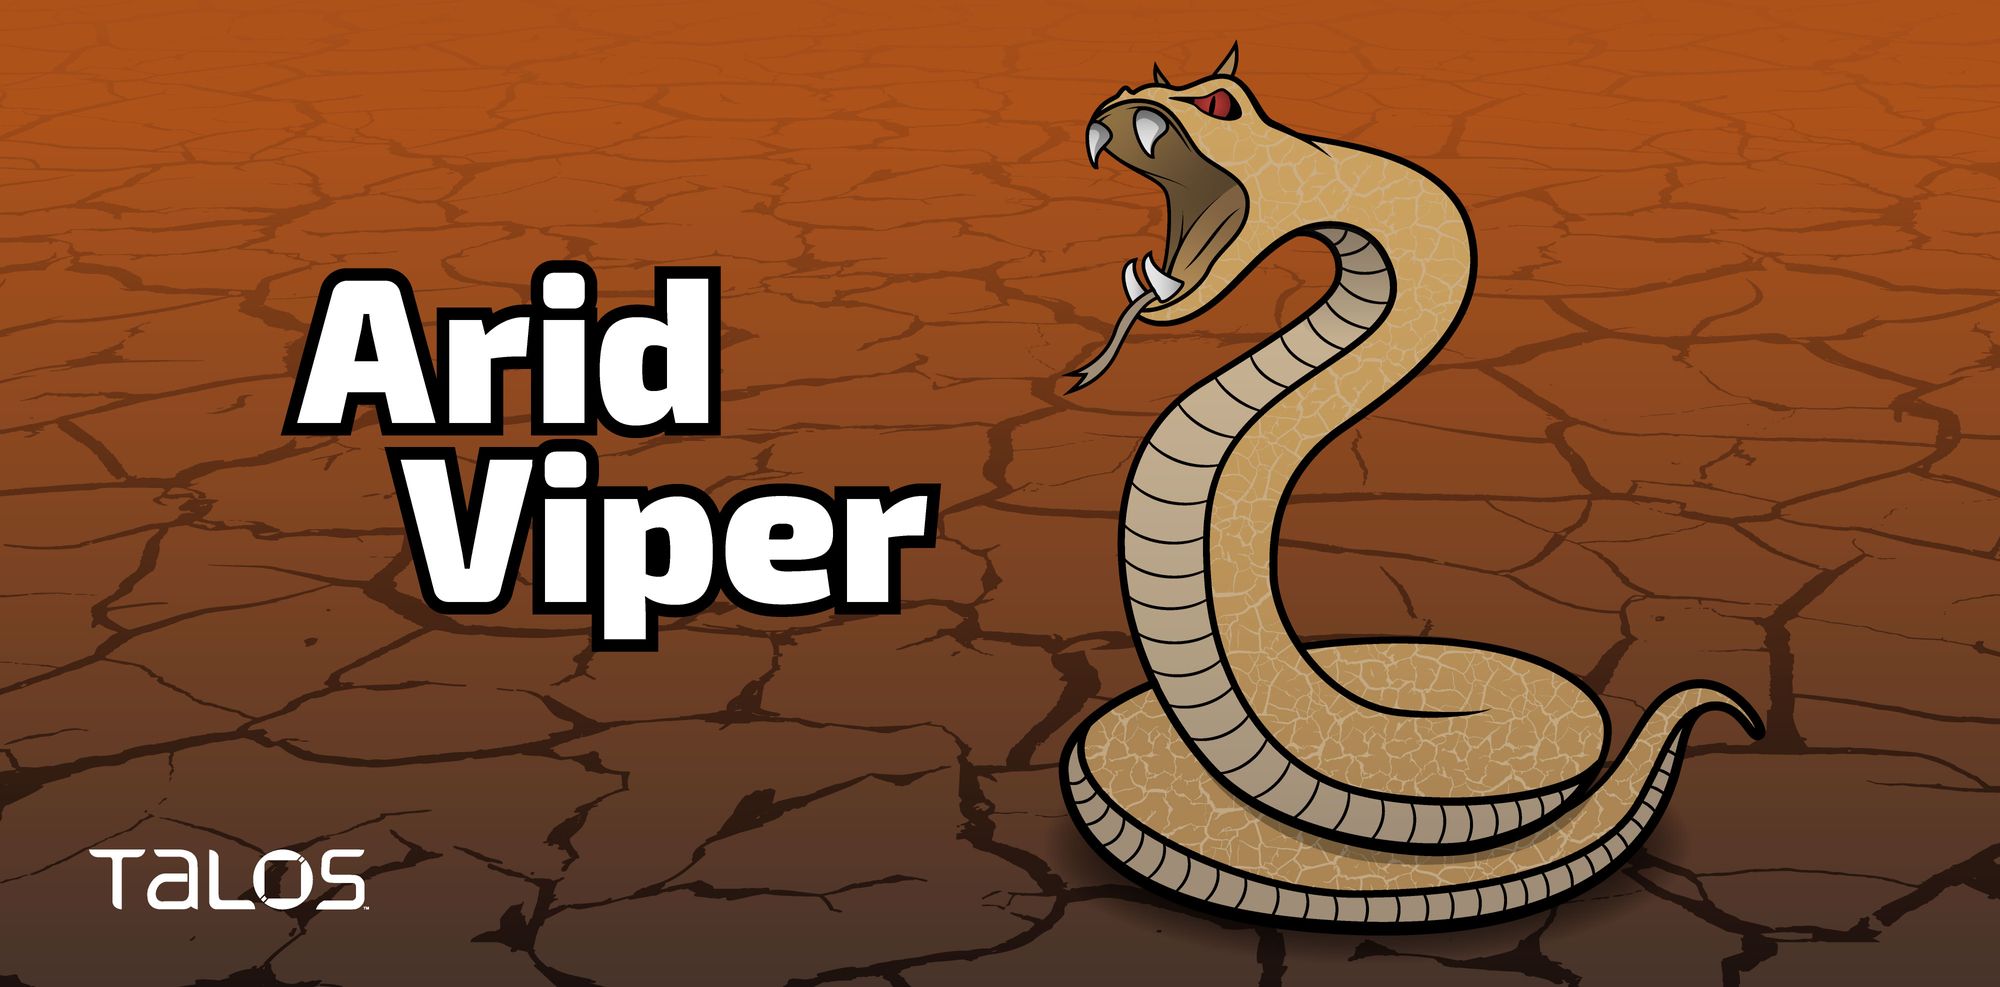 Arid Viper disguising mobile spyware as updates for non-malicious Android applications